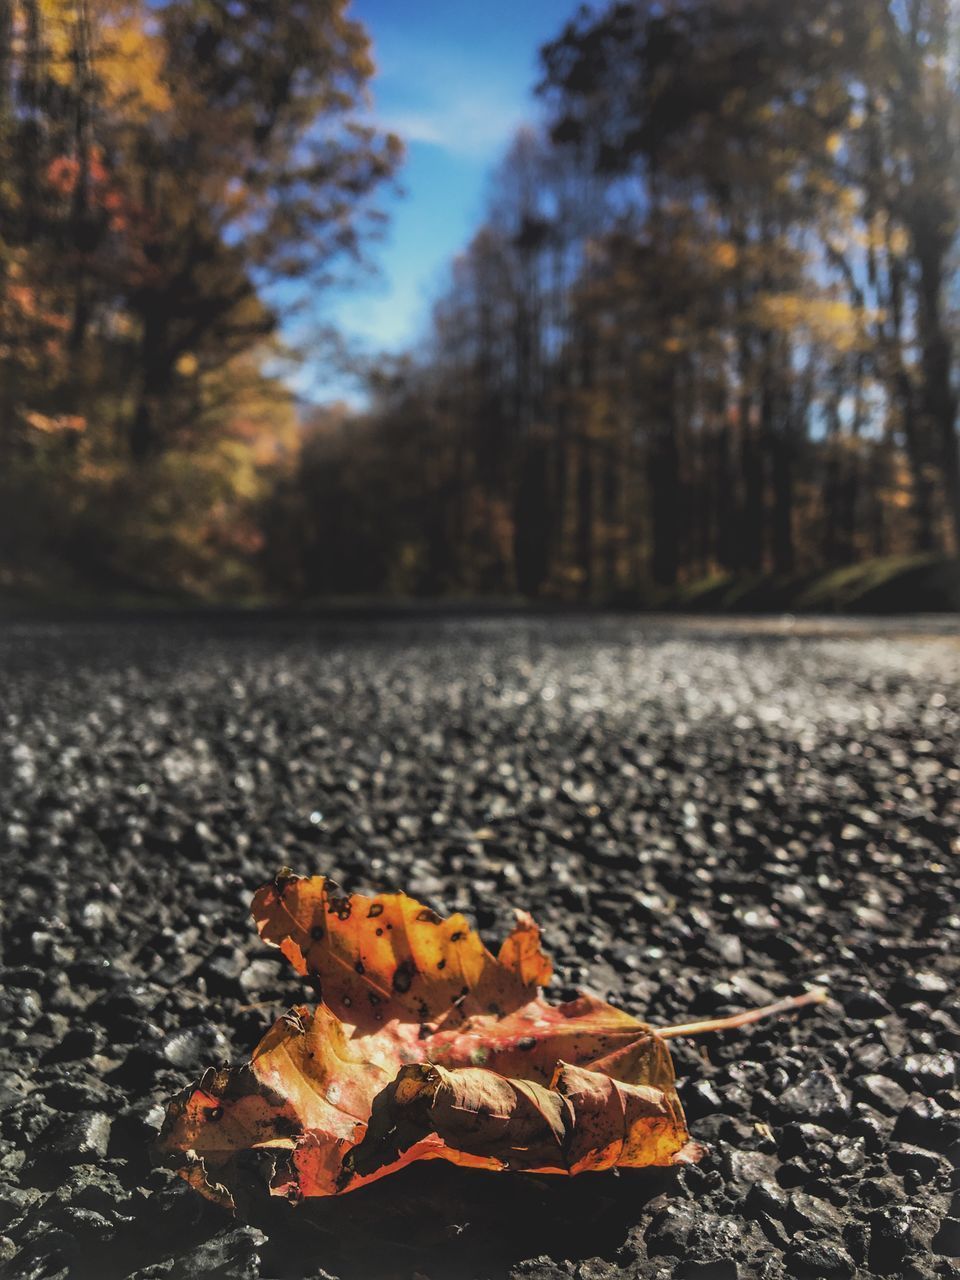 CLOSE-UP OF MAPLE LEAVES ON ROAD